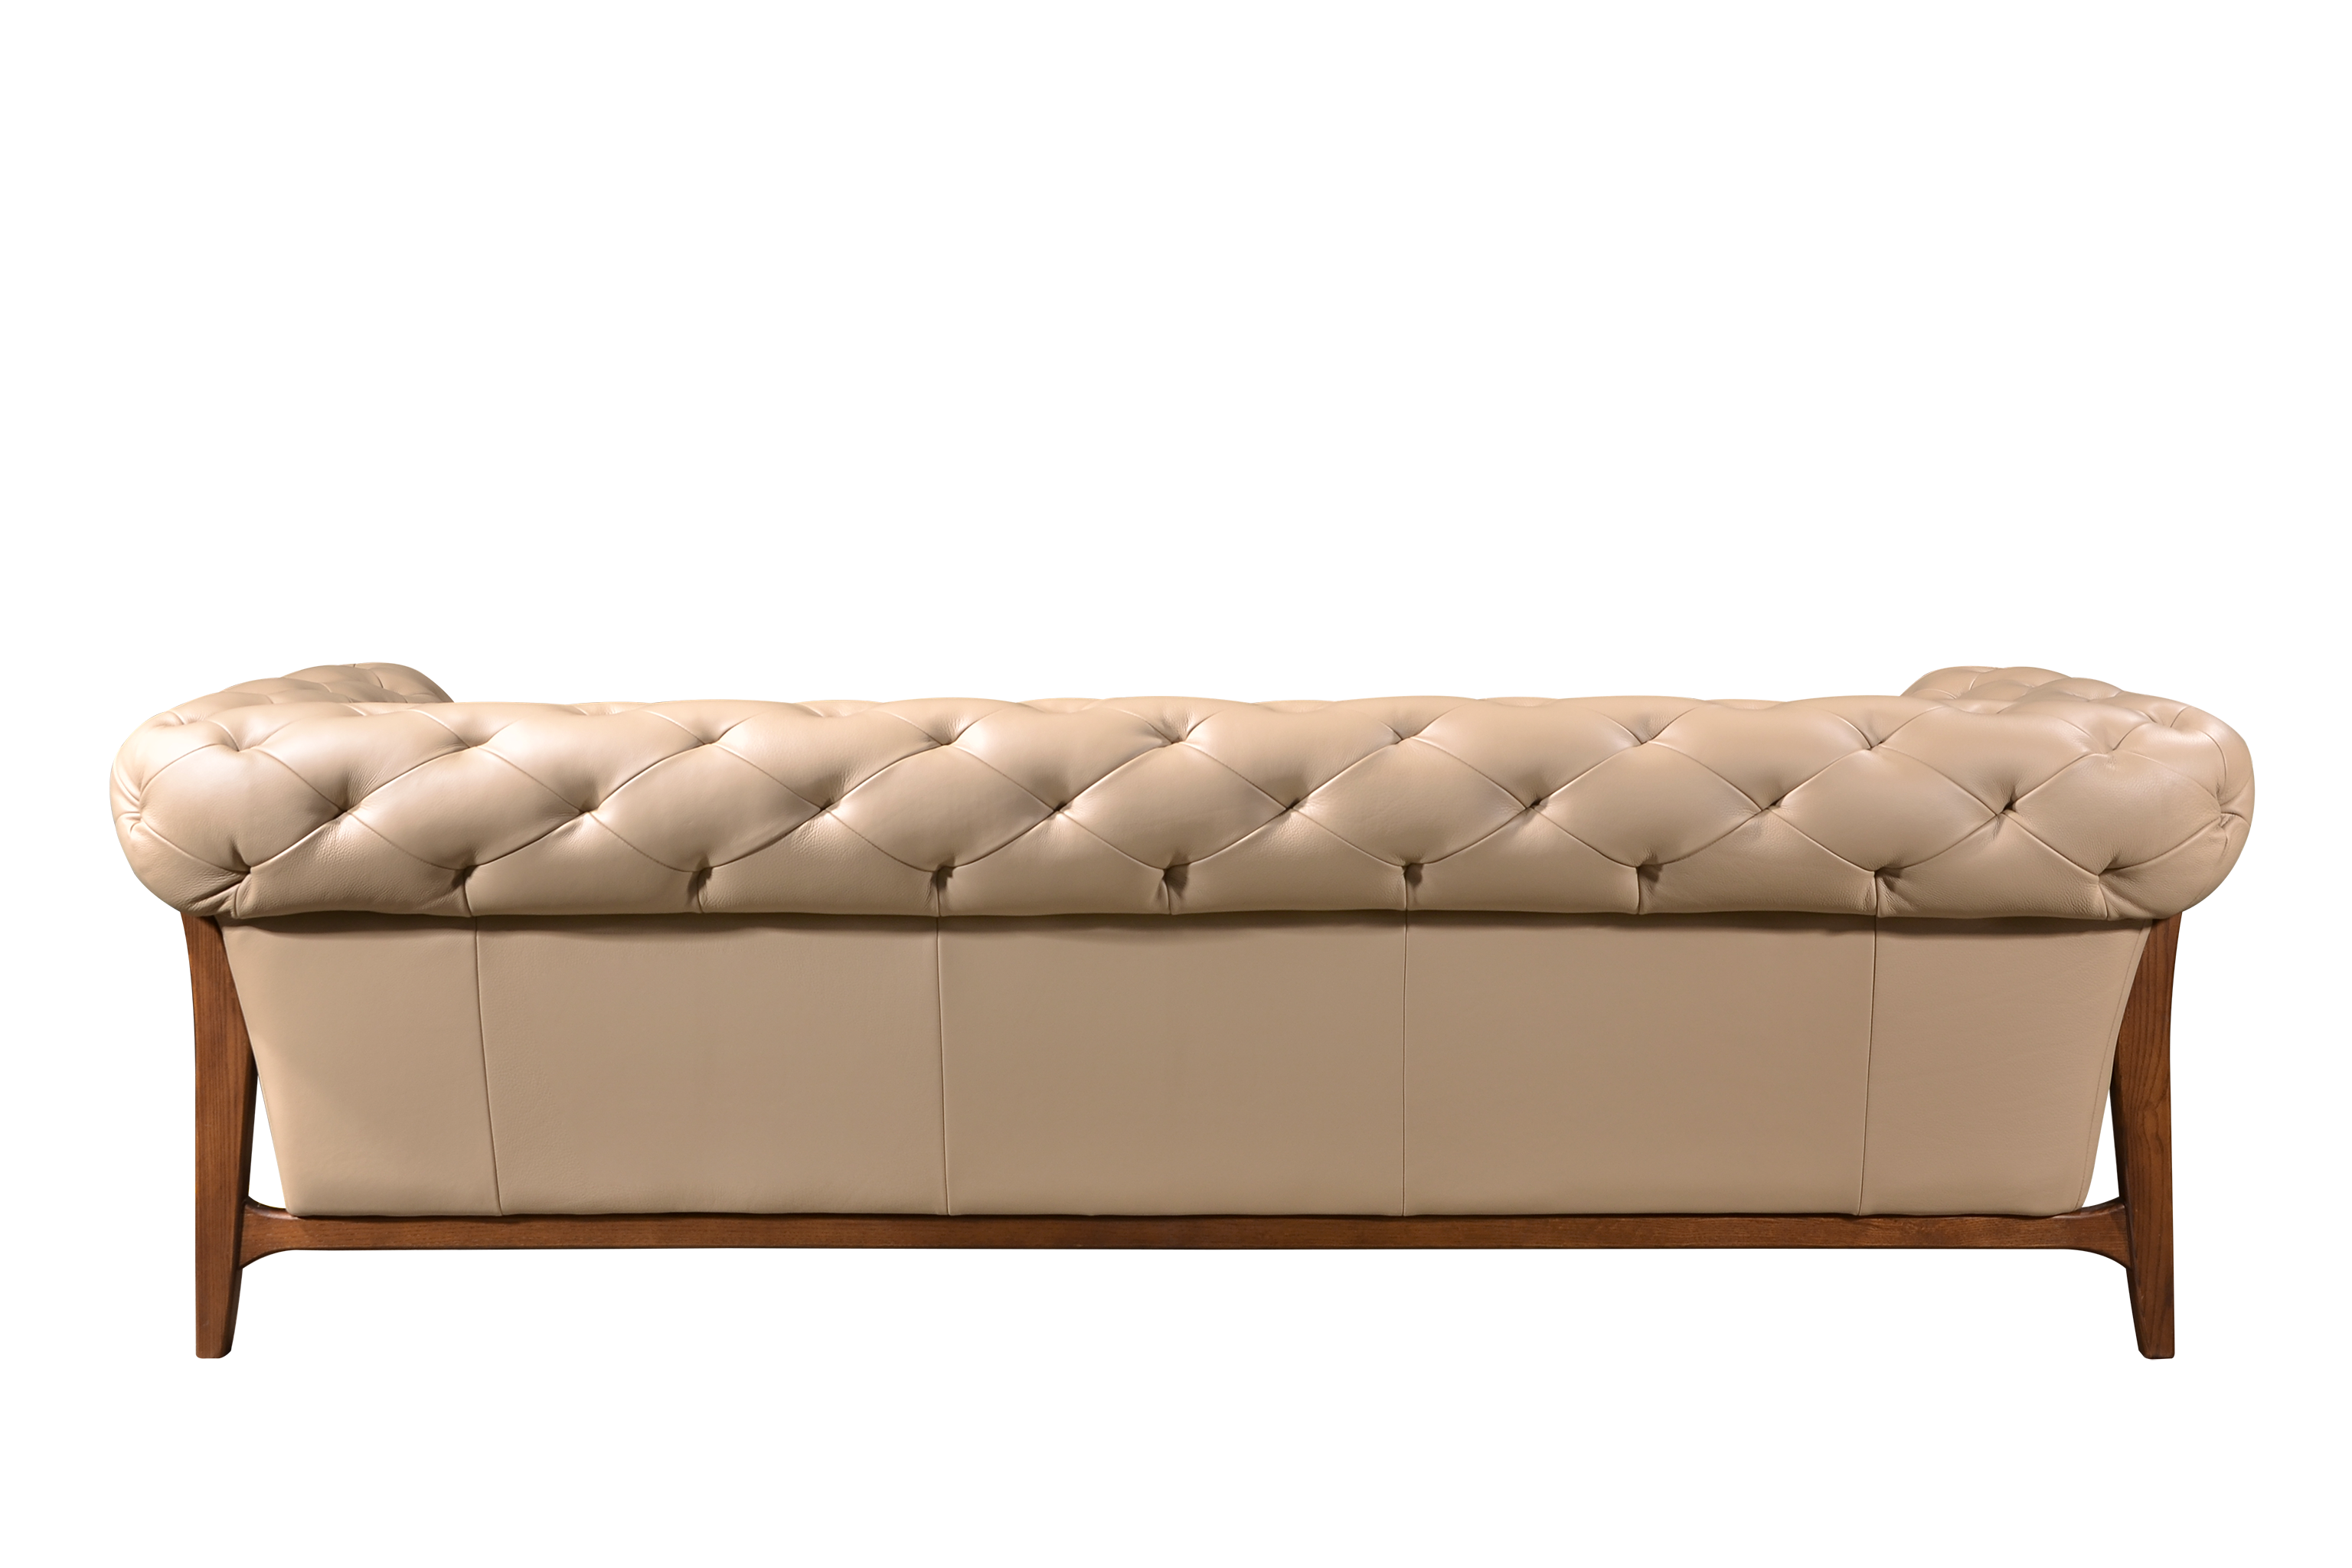 VINCENZO Made-in-Italy Top-Grain Leather Sofa by Castilla